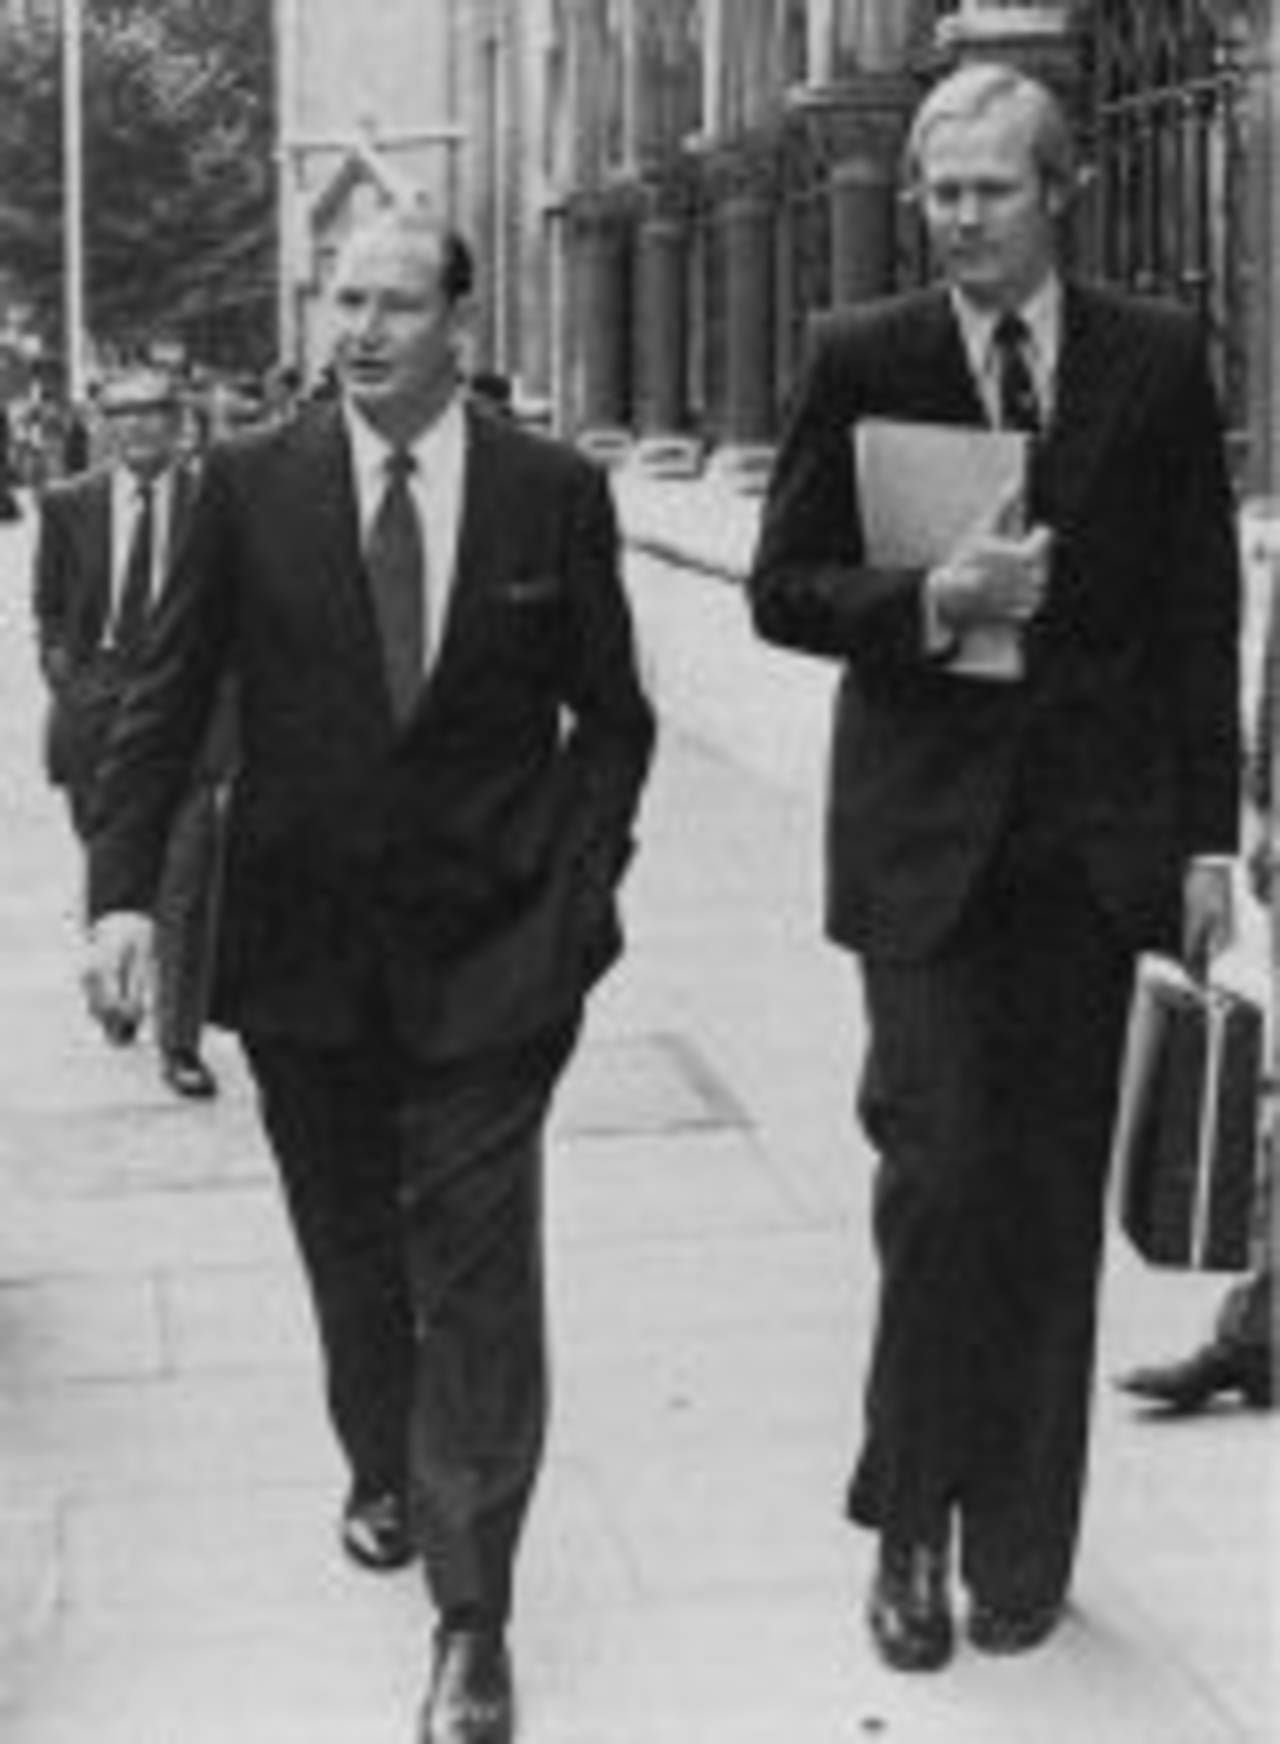 Kerry Packer and Tony Greig outside the High Court in London, October 1977